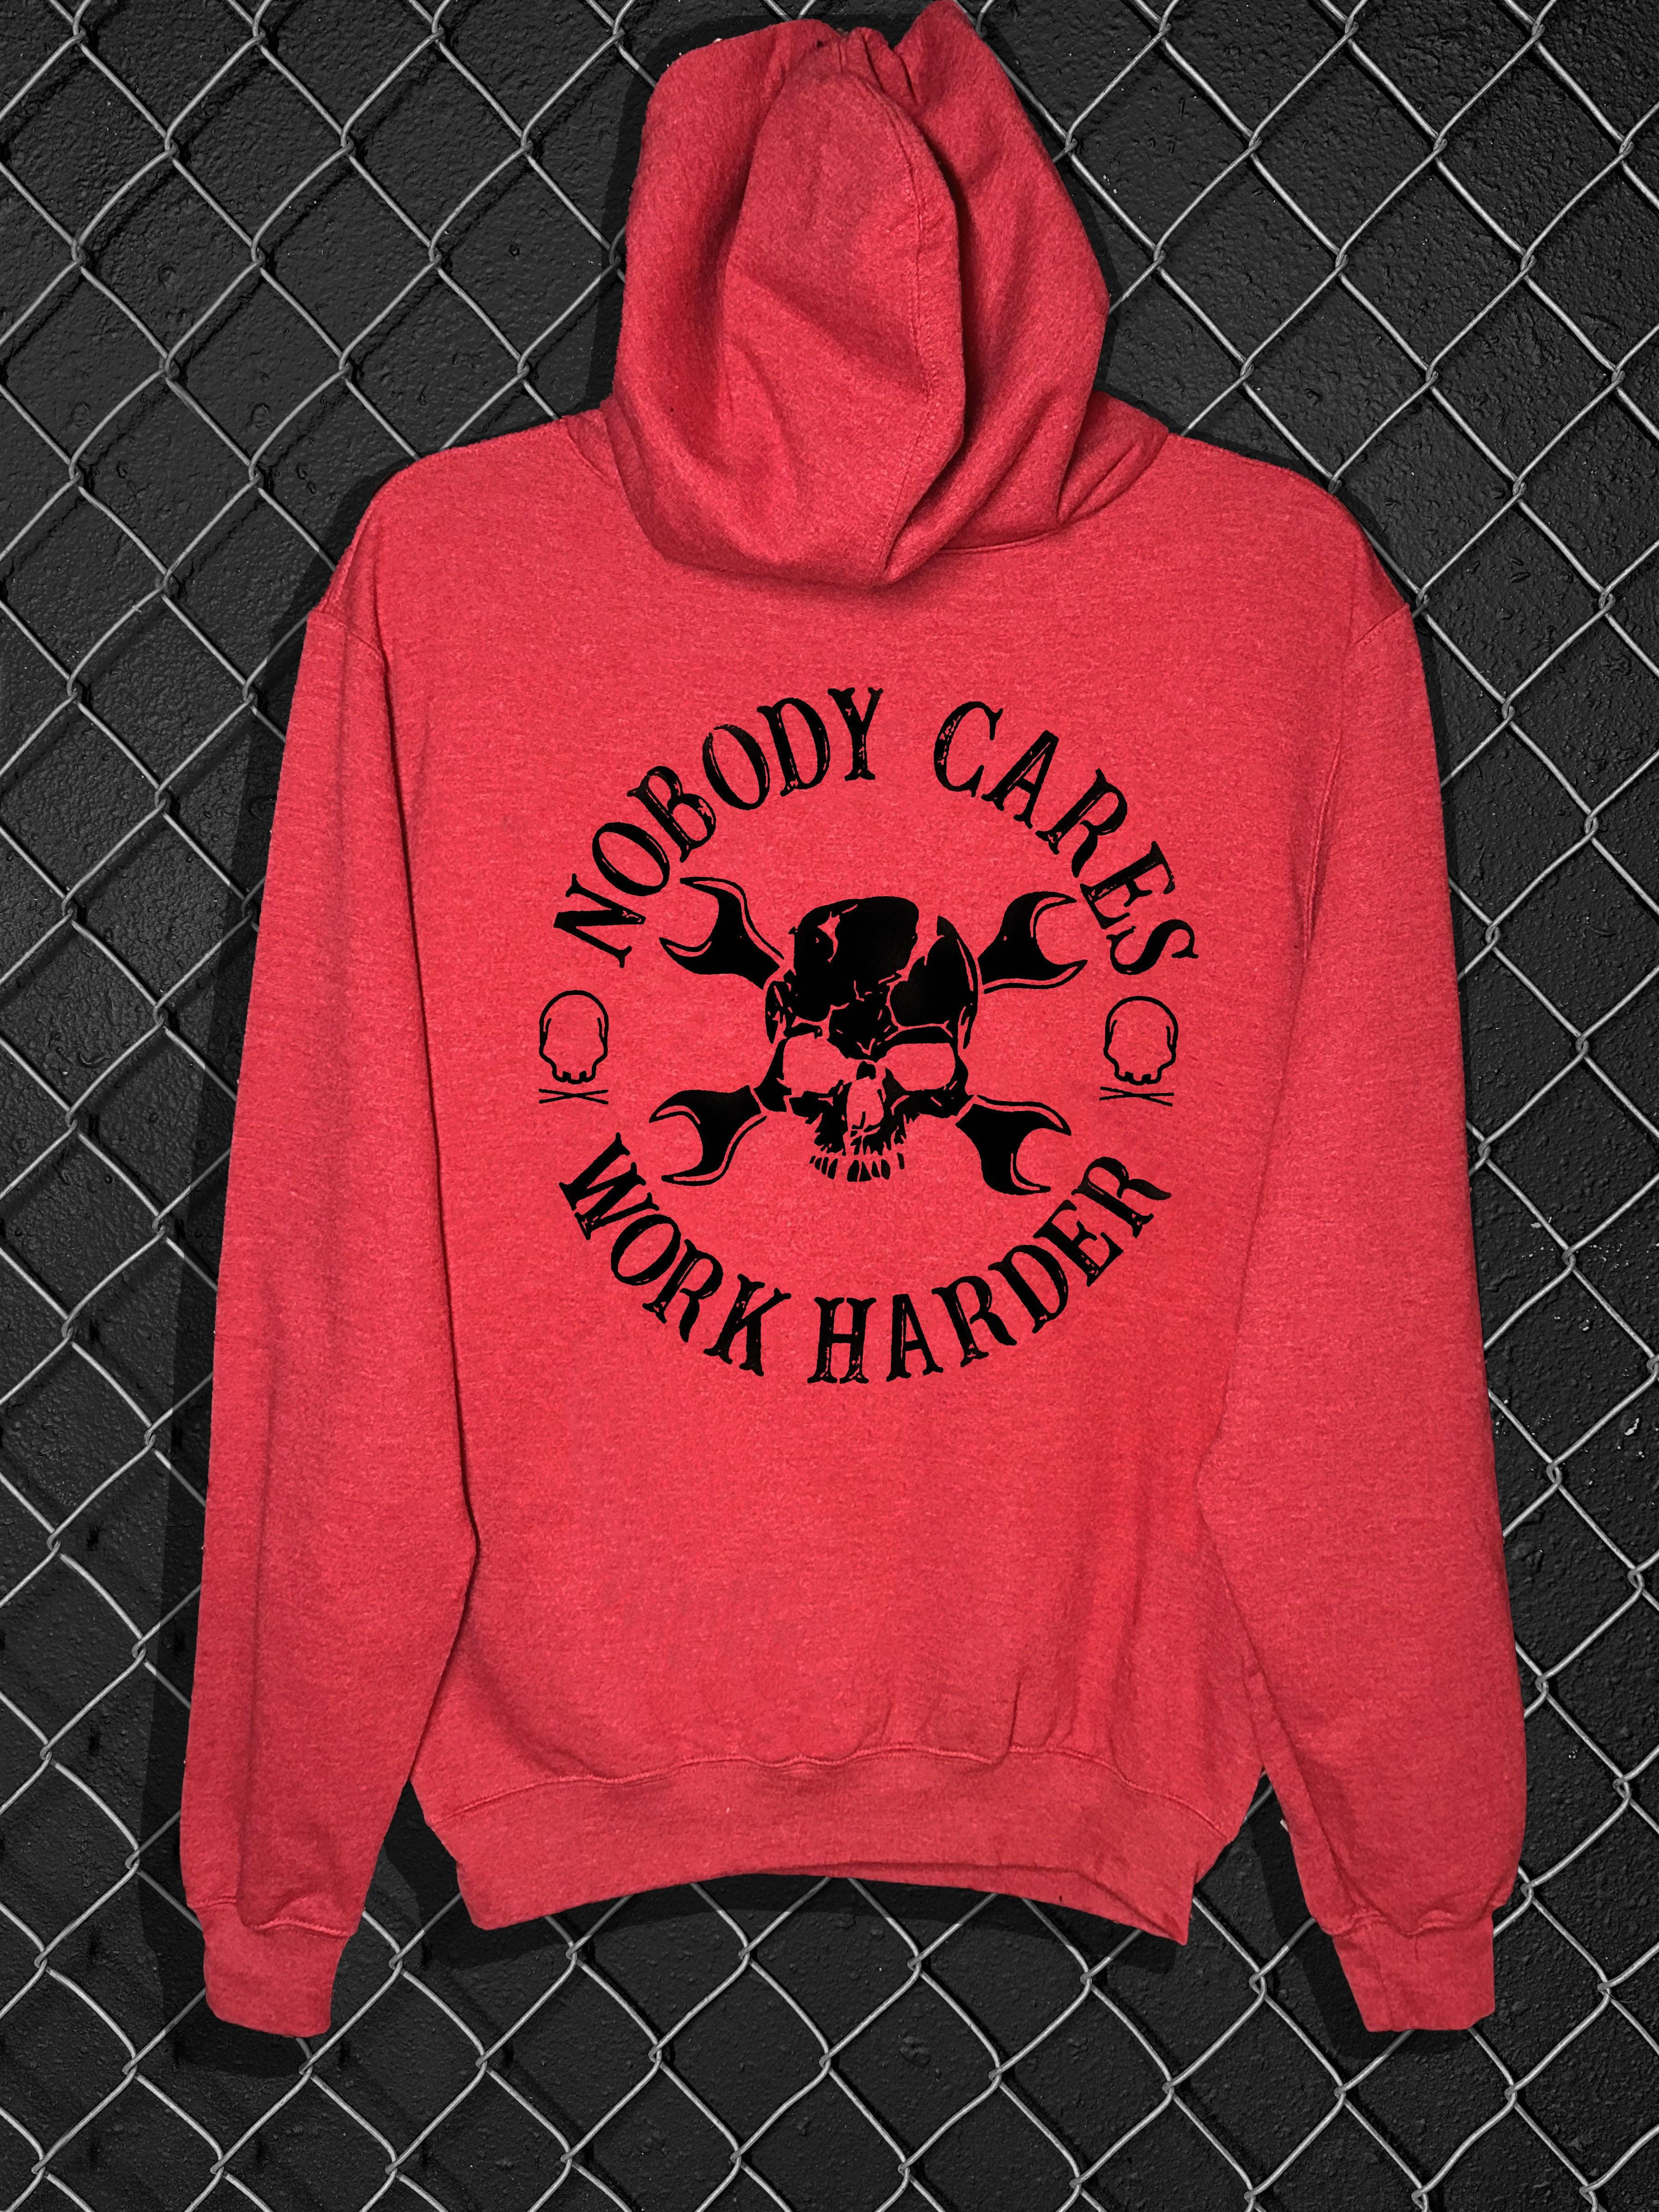 NOBODY HOODIE - The Drive Clothing